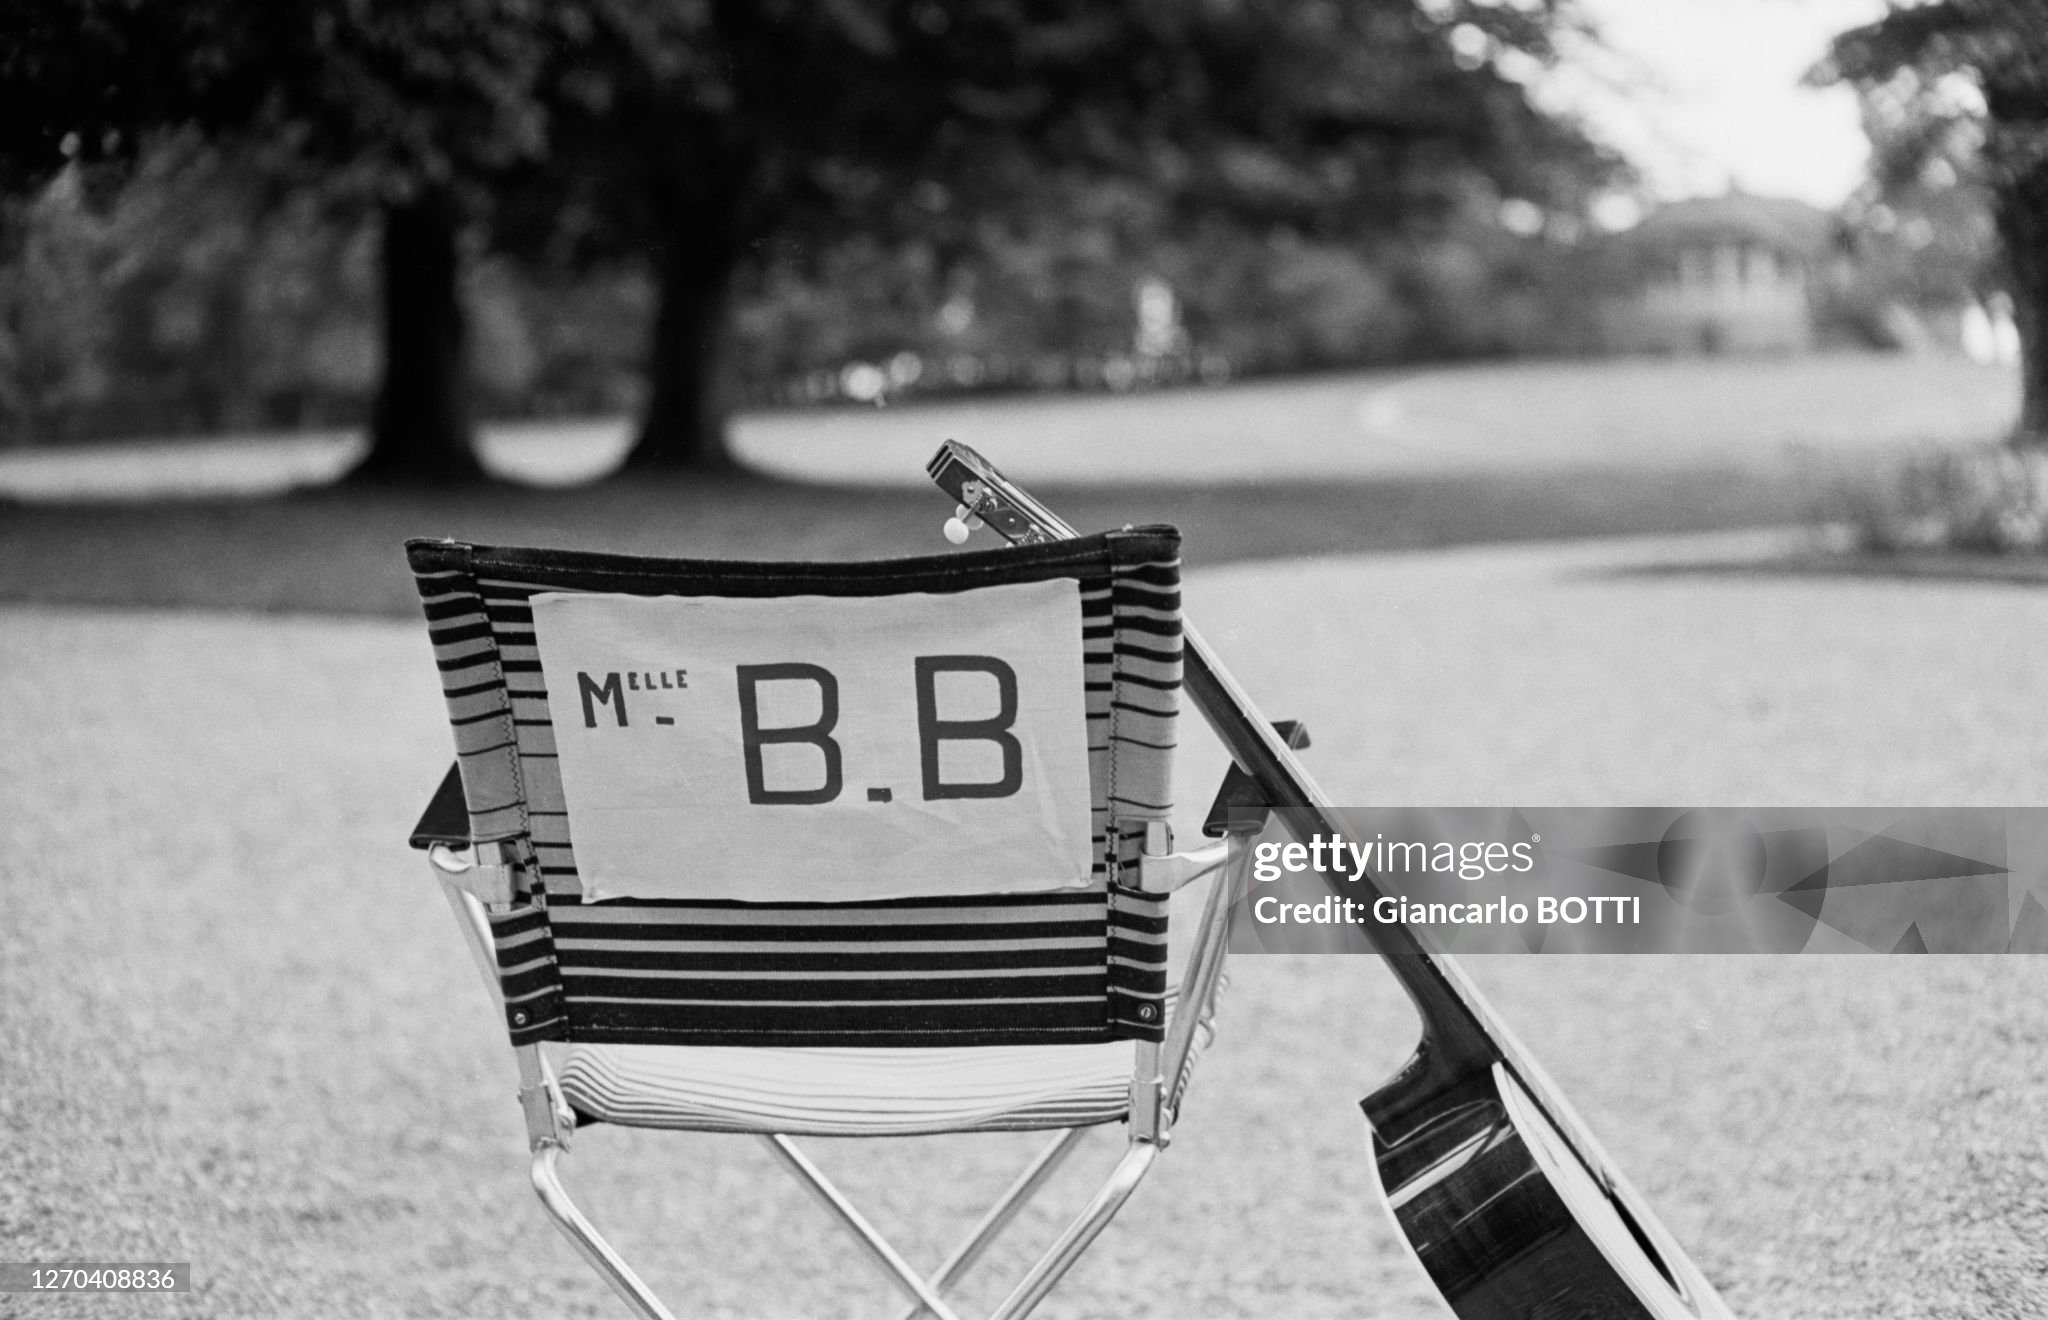 The chair of Brigitte Bardot during the filming of the film 'Private life' in Saint-Tropez in 1961. 